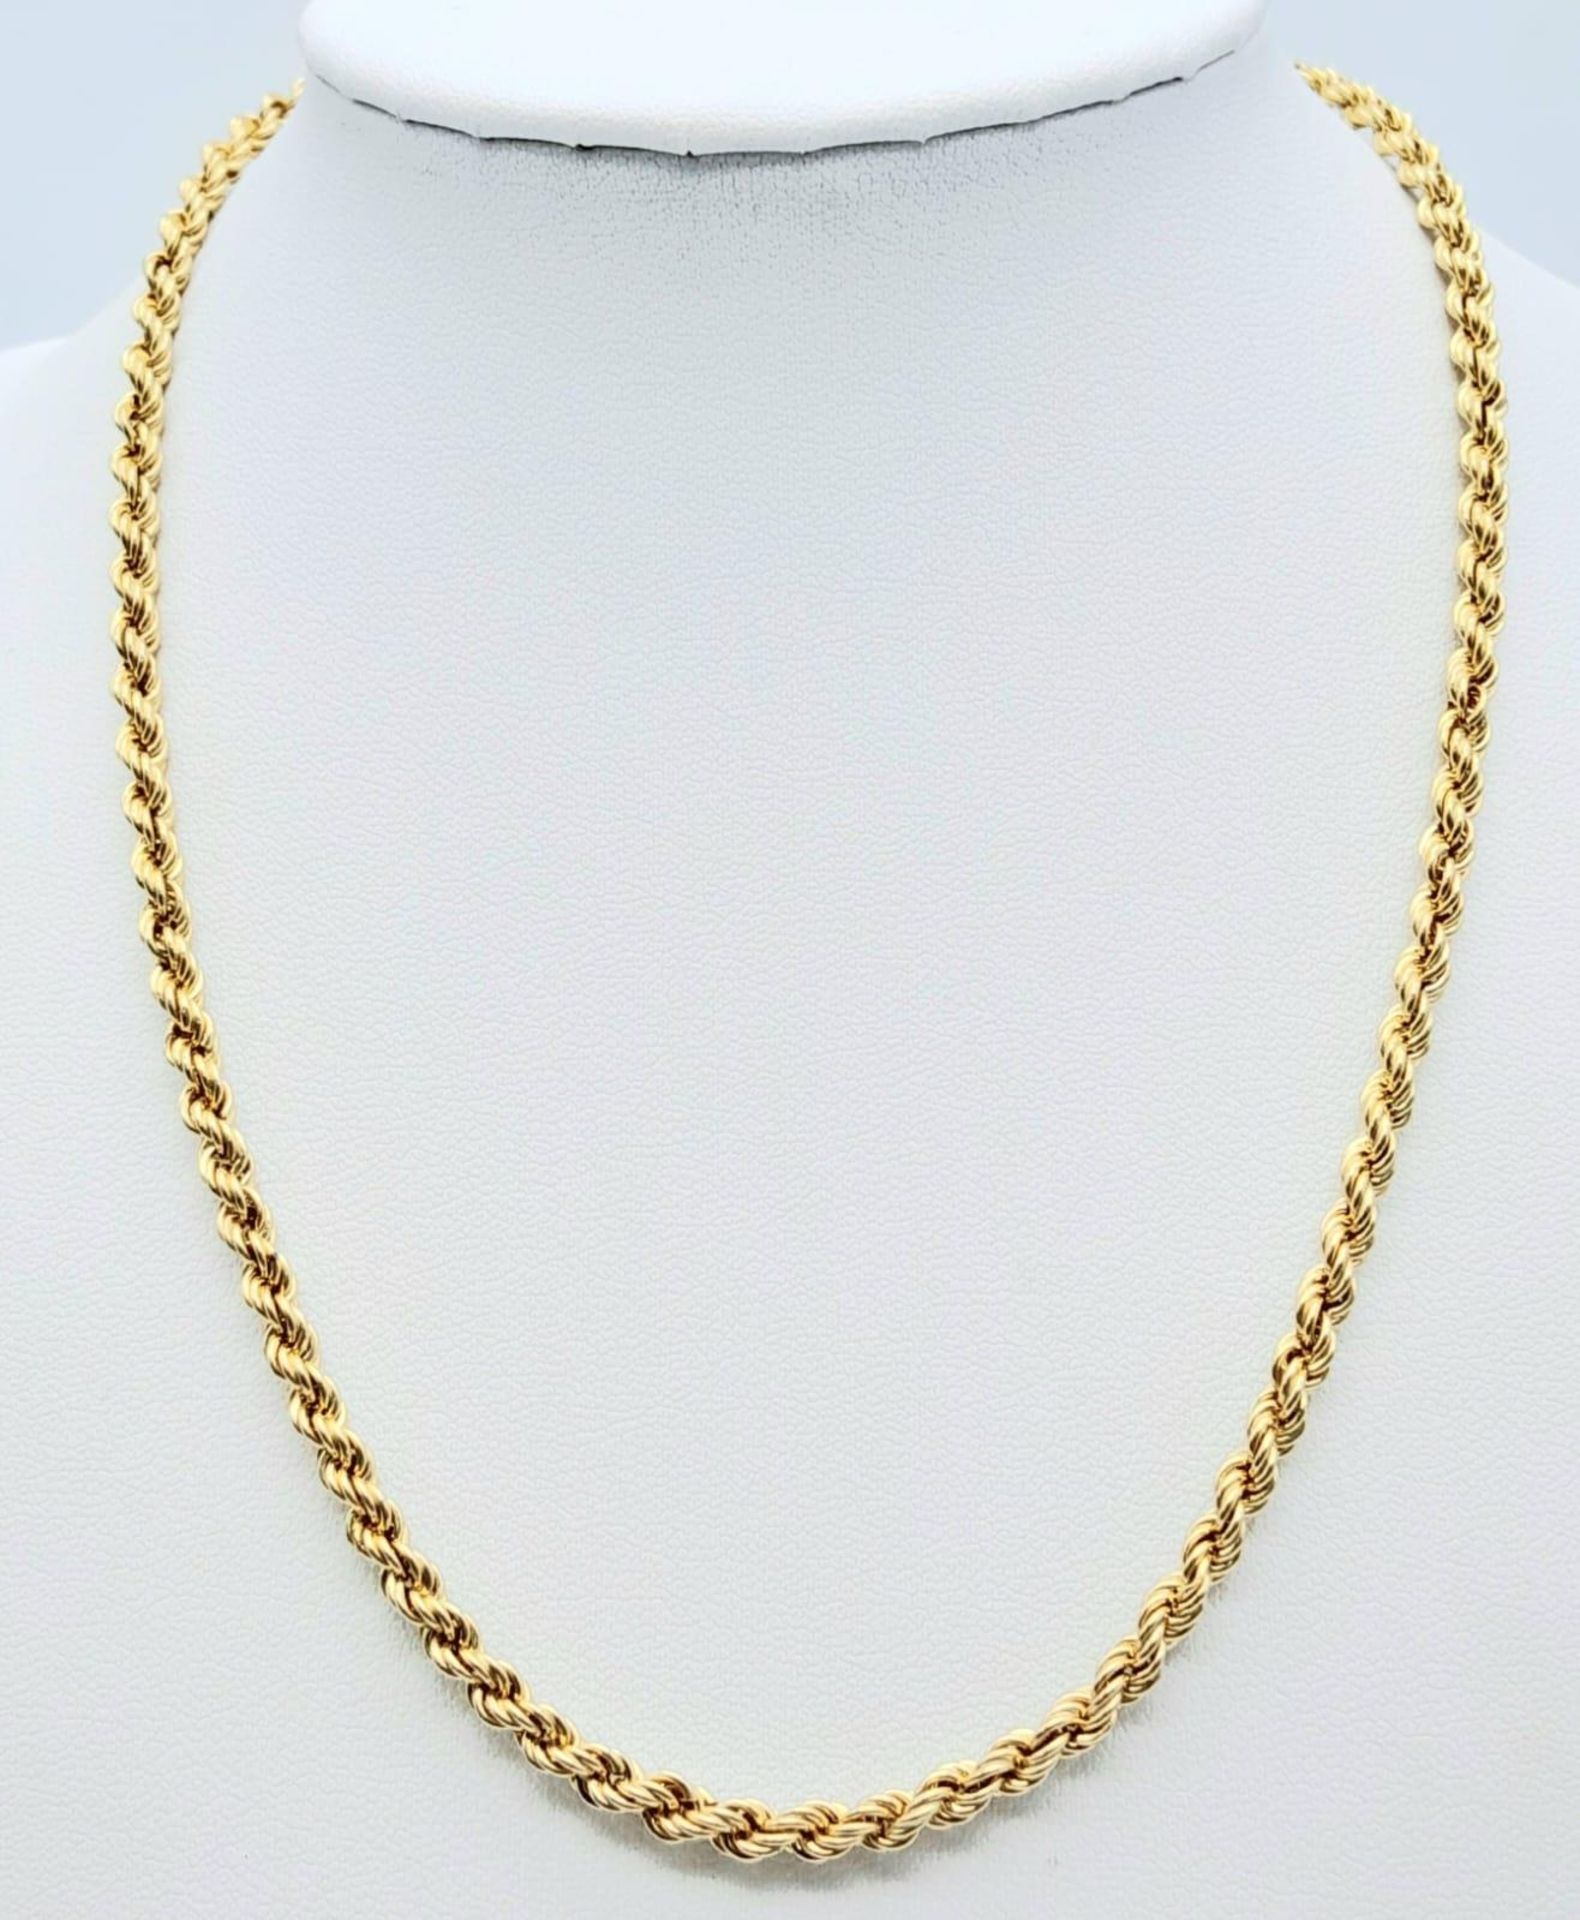 A 9K Yellow Gold Rope Necklace. 40cm length. 4.65g weight. - Image 2 of 5